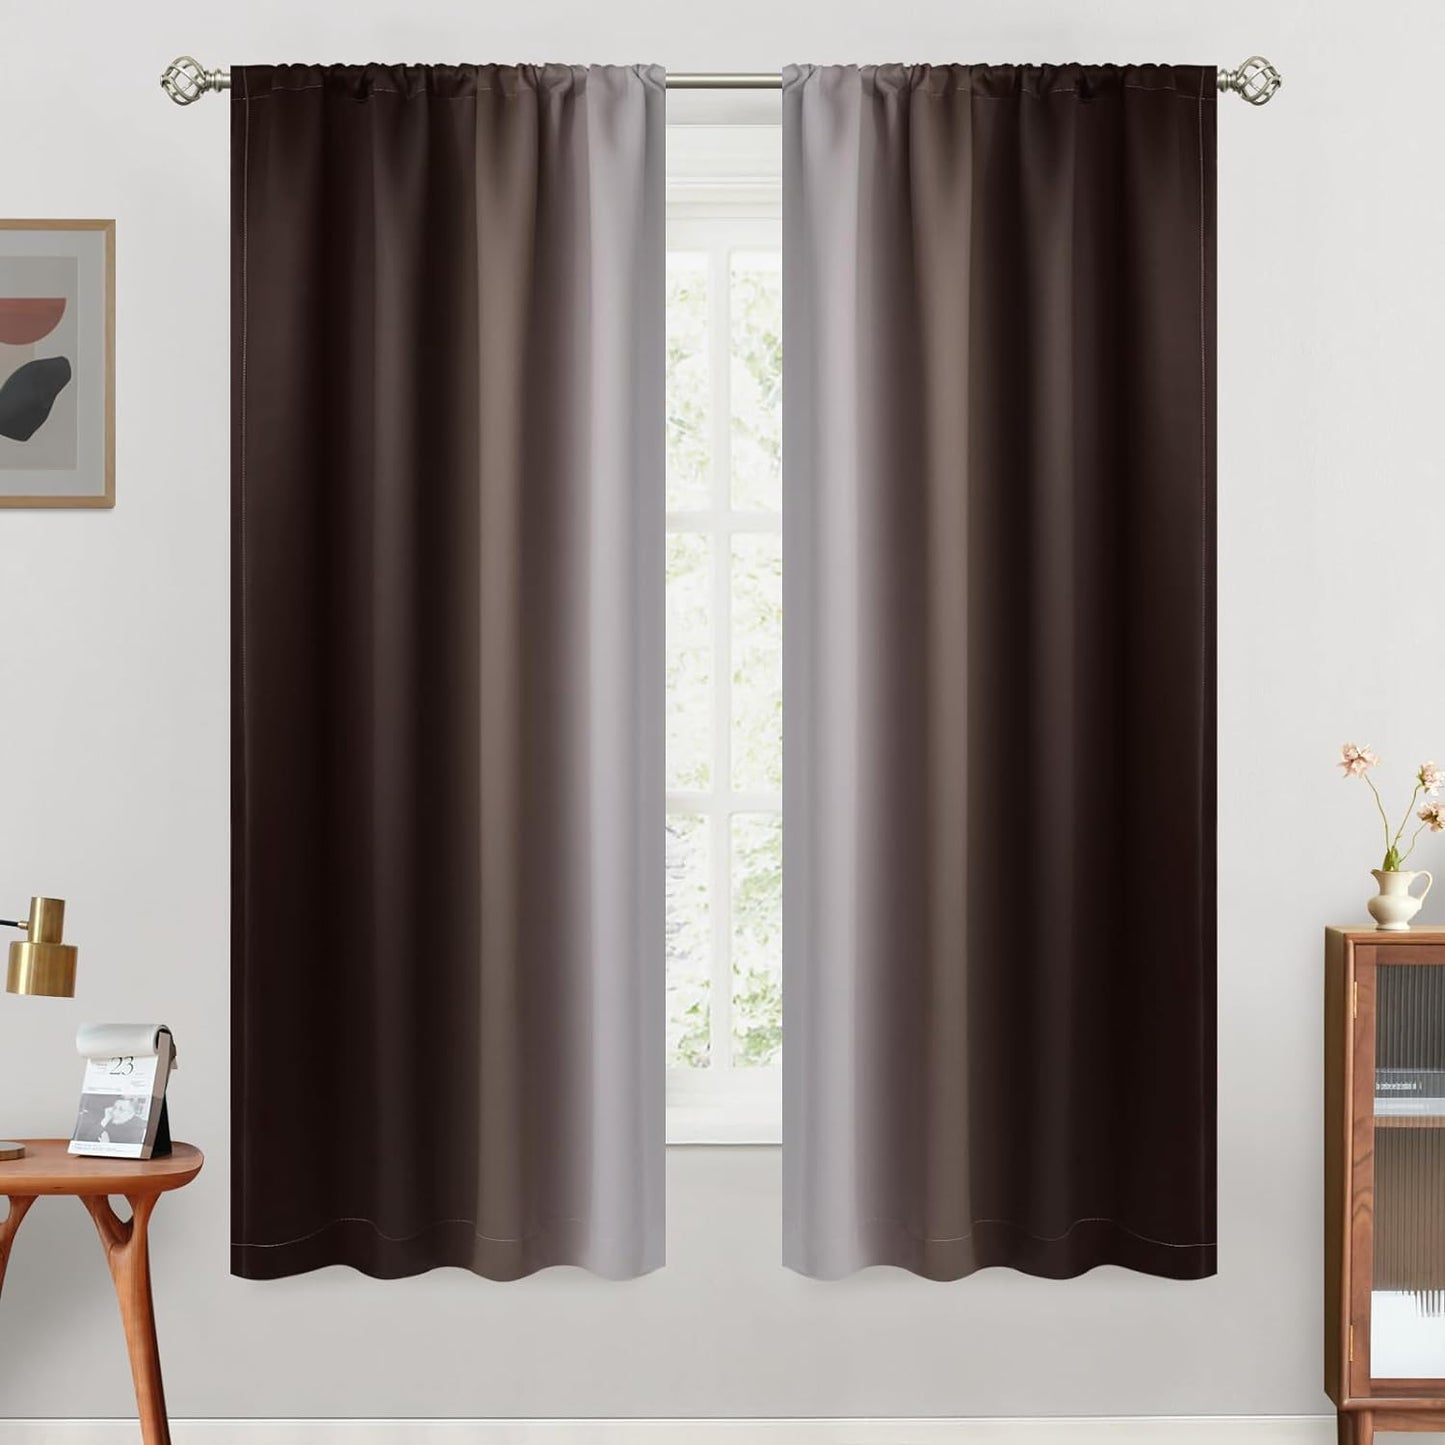 Simplehome Ombre Room Darkening Curtains for Bedroom, Light Blocking Gradient Purple to Greyish White Thermal Insulated Rod Pocket Window Curtains Drapes for Living Room,2 Panels, 52X84 Inches Length  SimpleHome Brown 42W X 63L / 2 Panels 